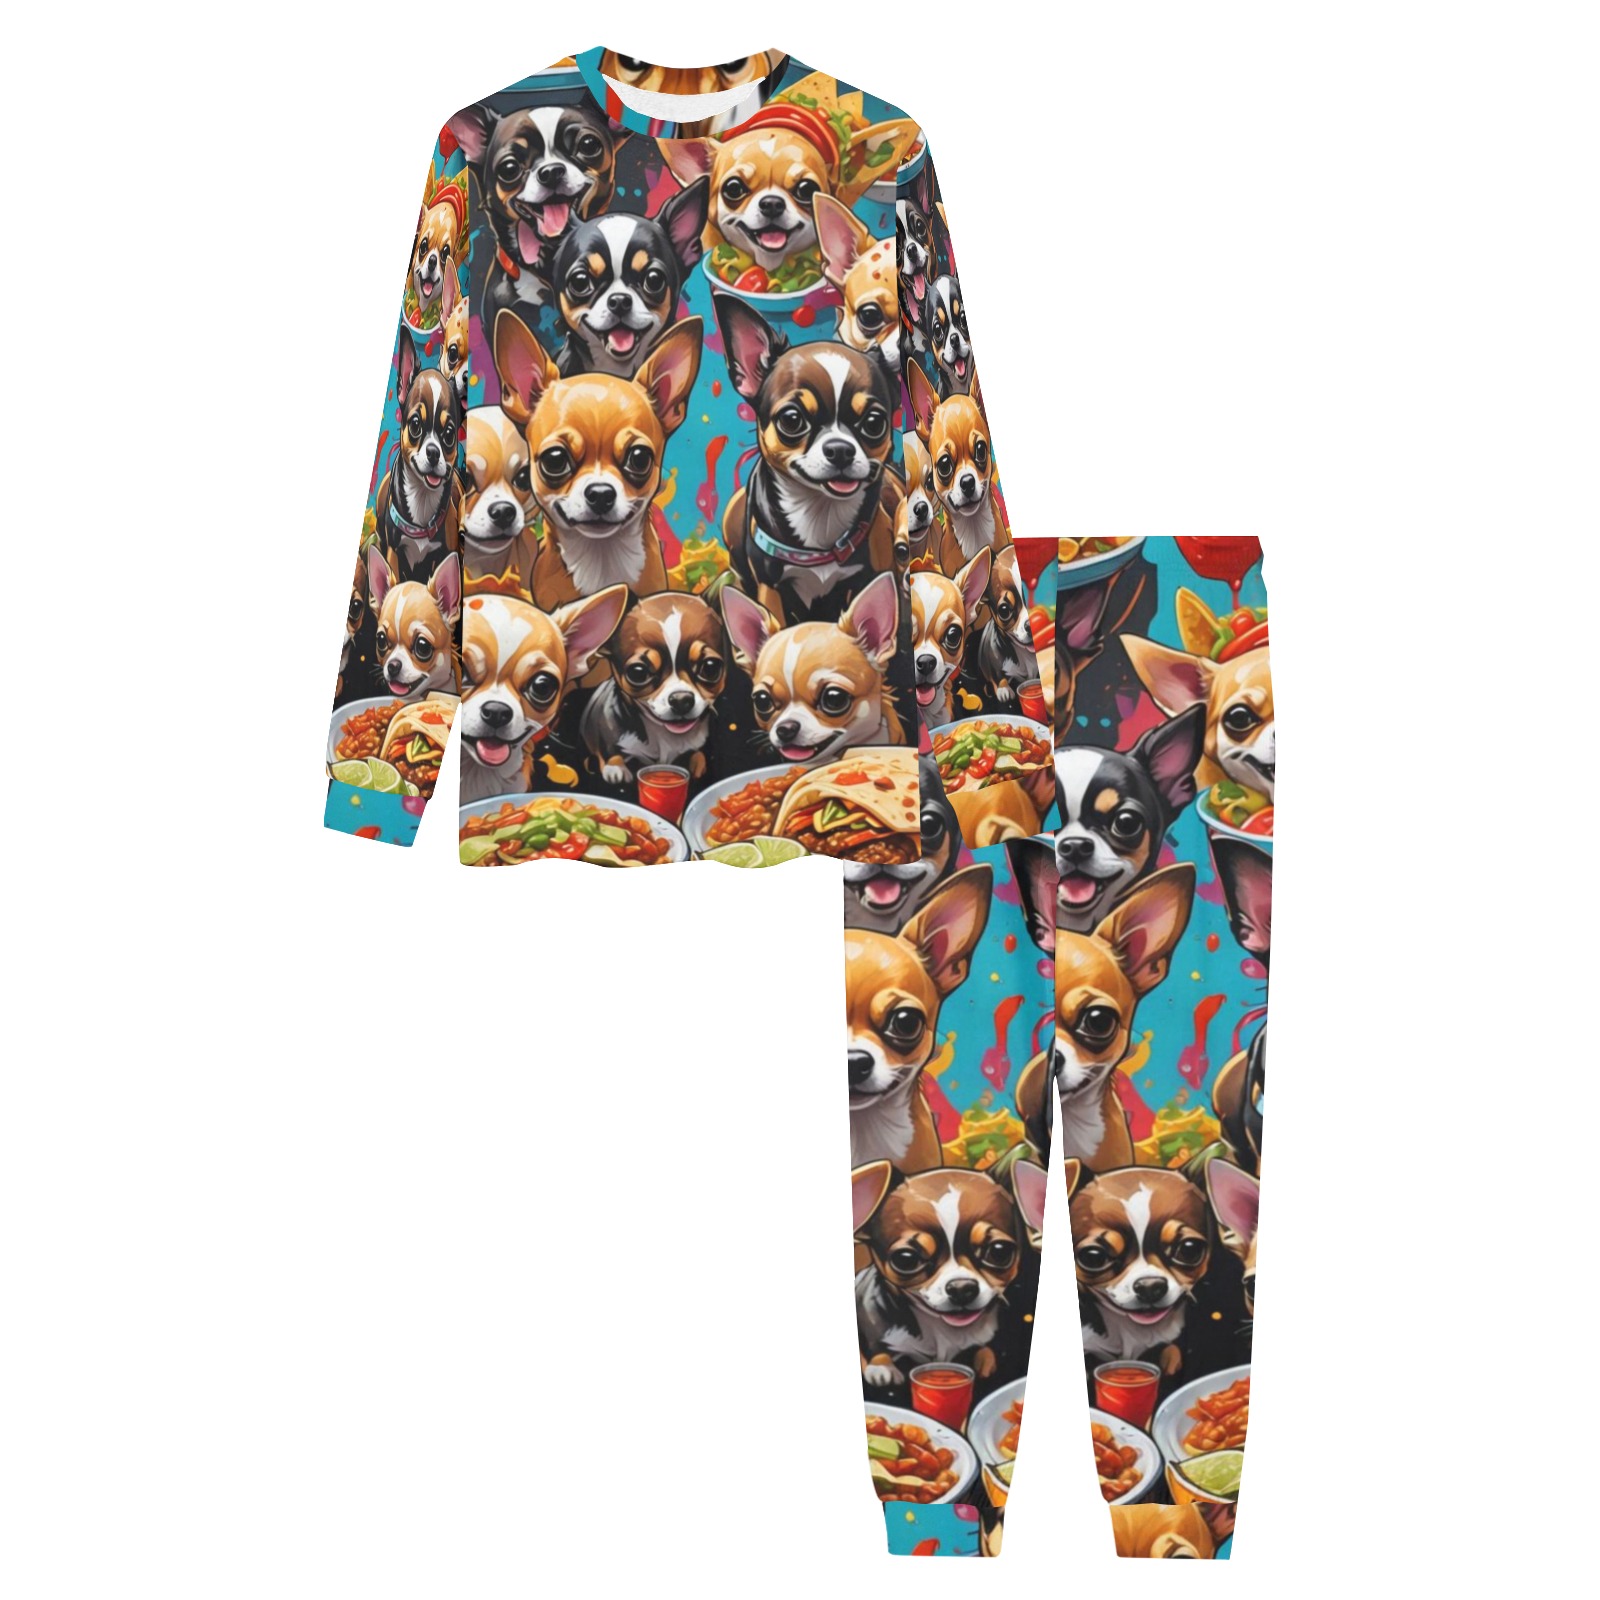 CHIHUAHUAS EATING MEXICAN FOOD 2 Men's All Over Print Pajama Set with Custom Cuff